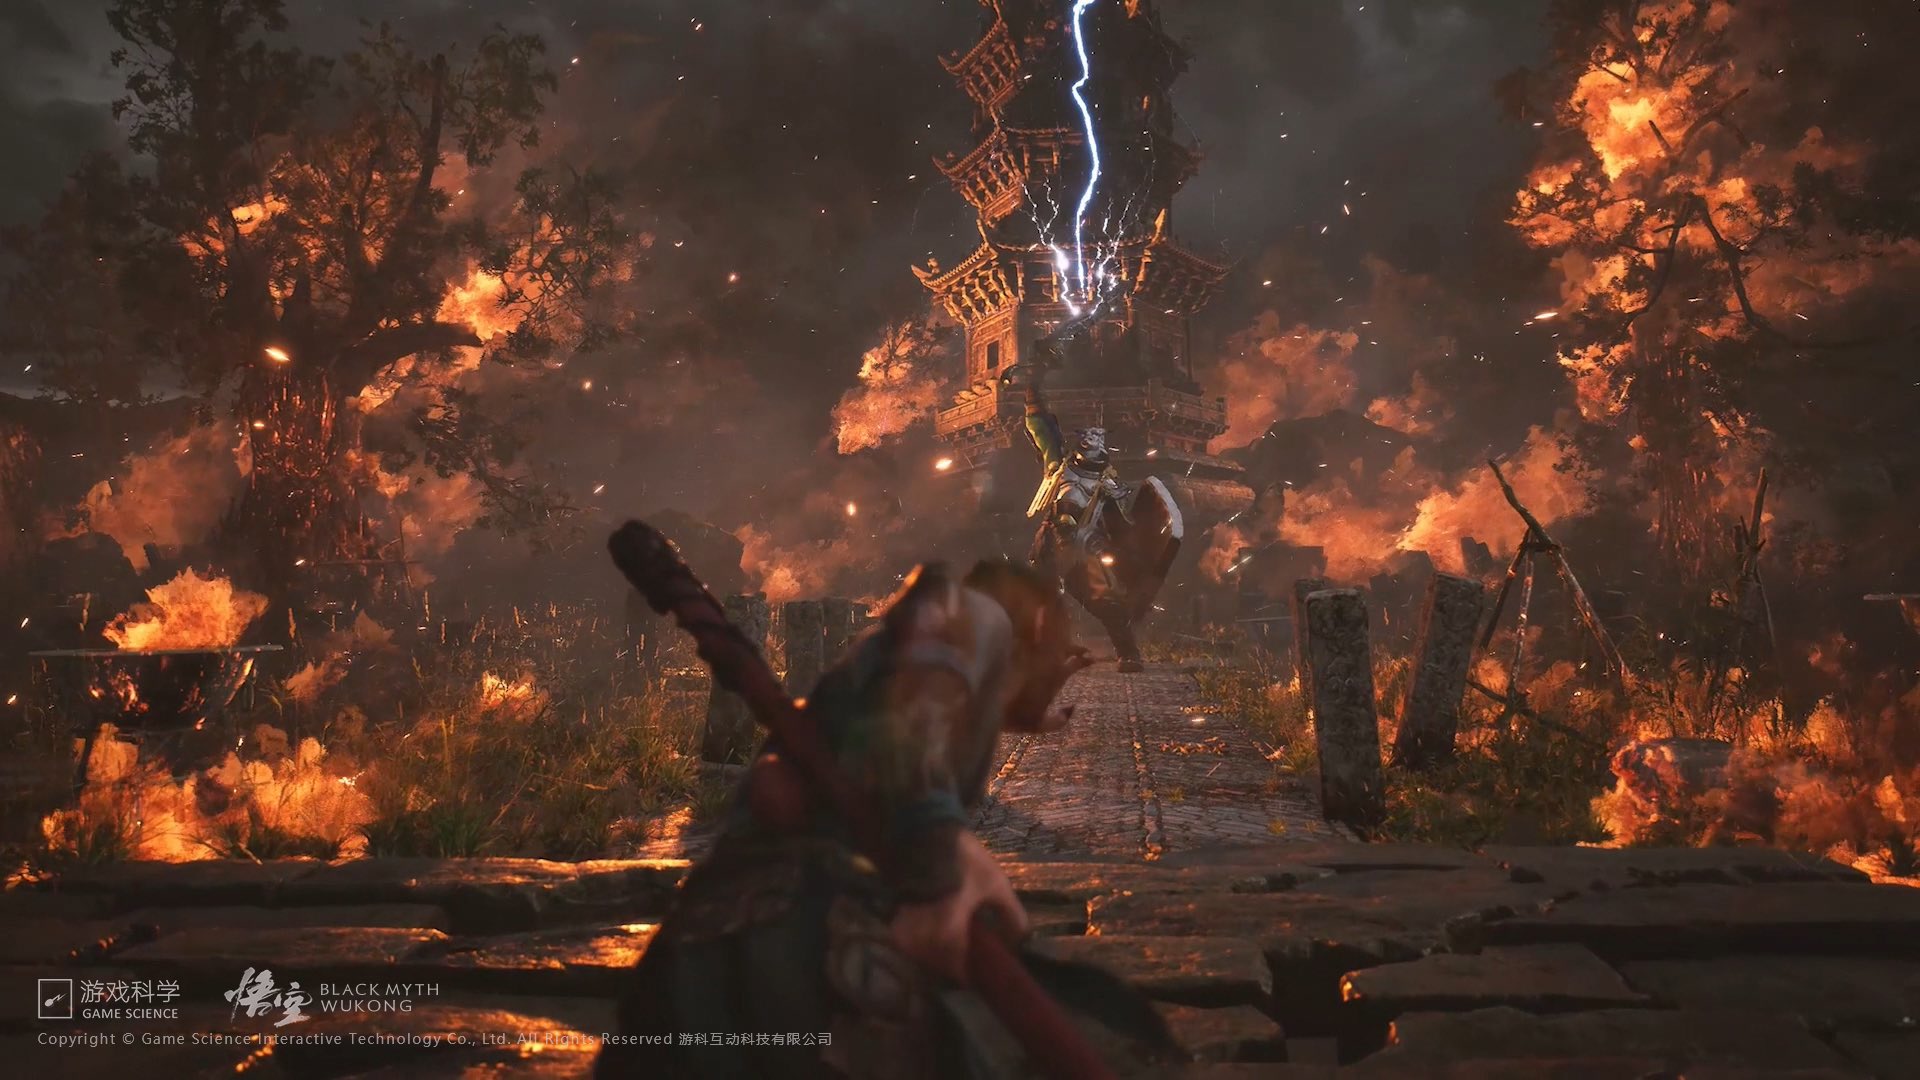 Screenshot from Black Myth: Wukong showing a fire boss character